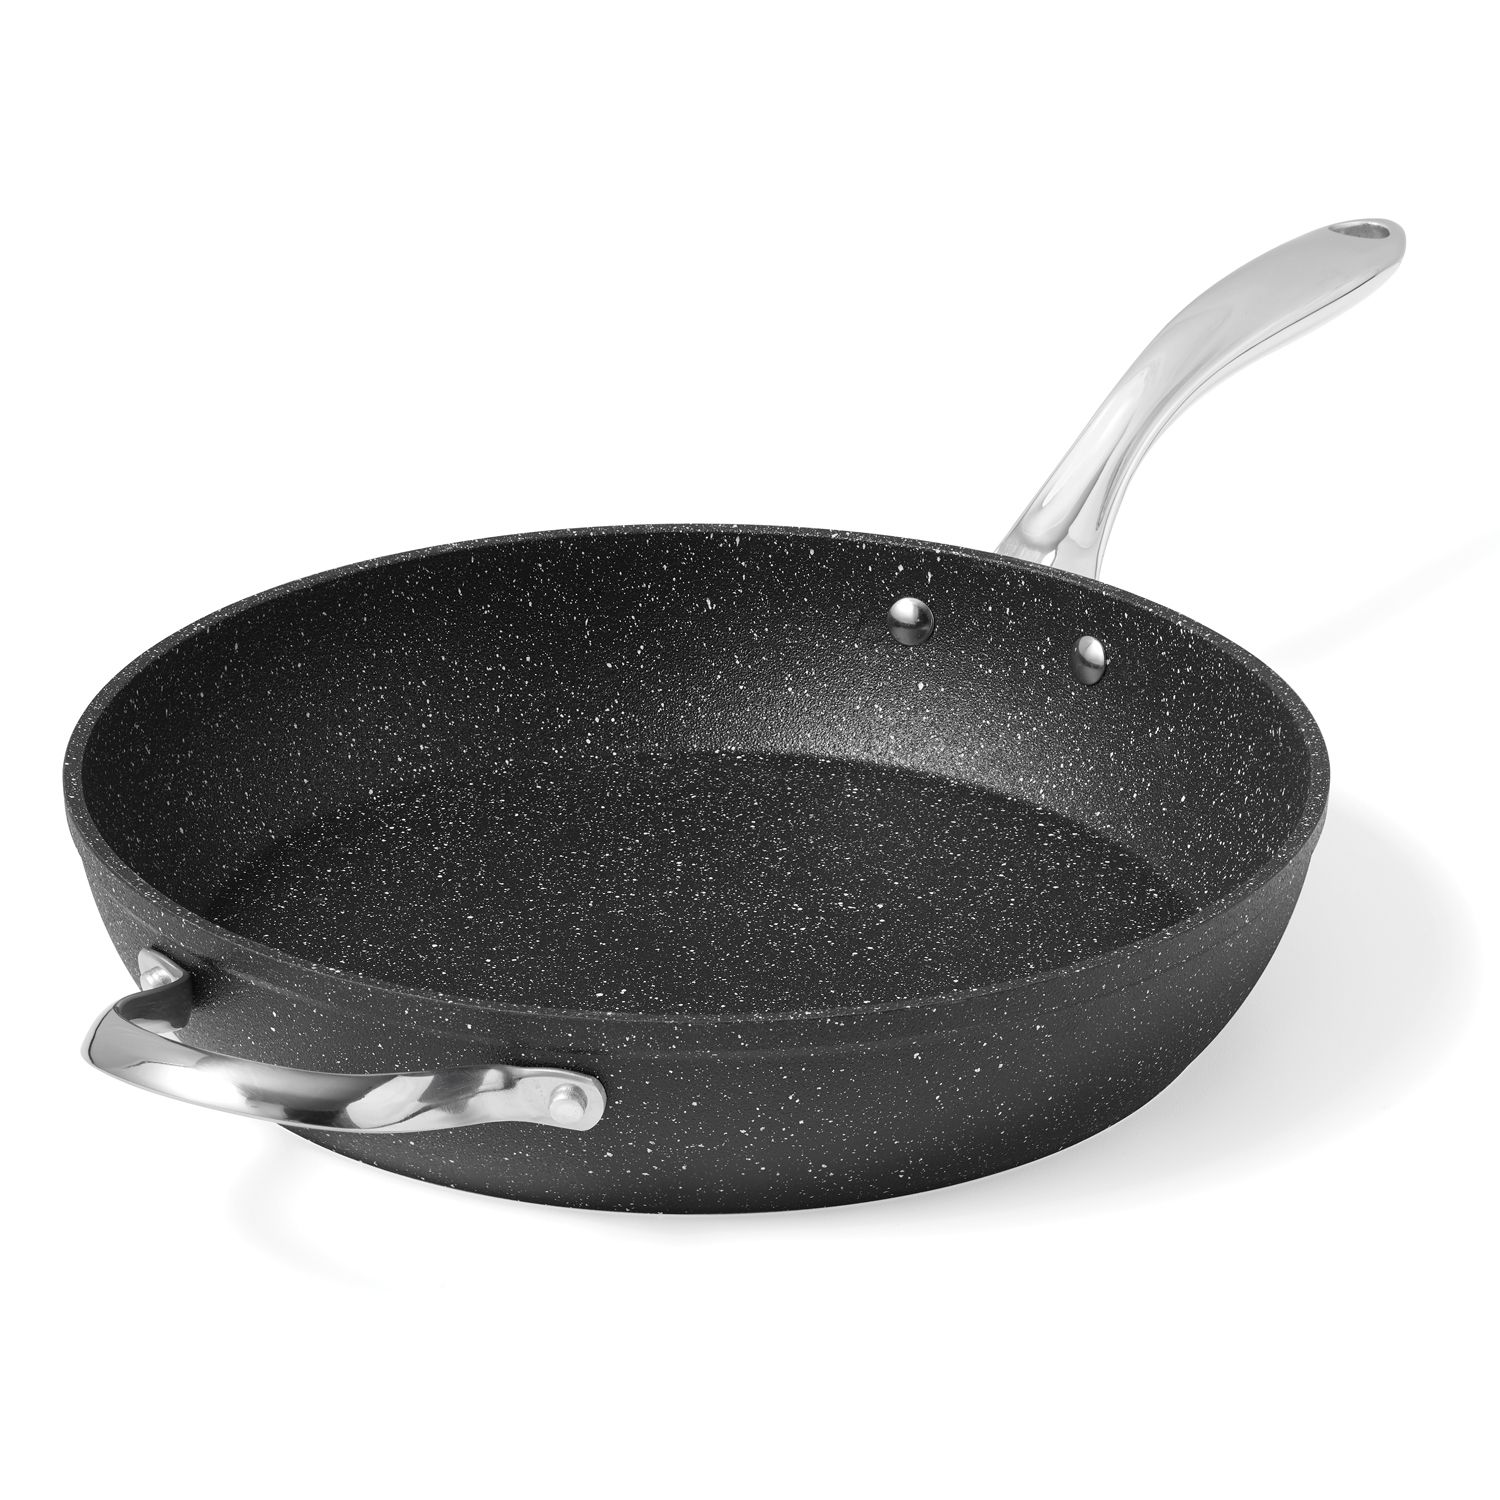 The Rock By Starfrit 12 Aluminum Fry Pan With Stainless Steel